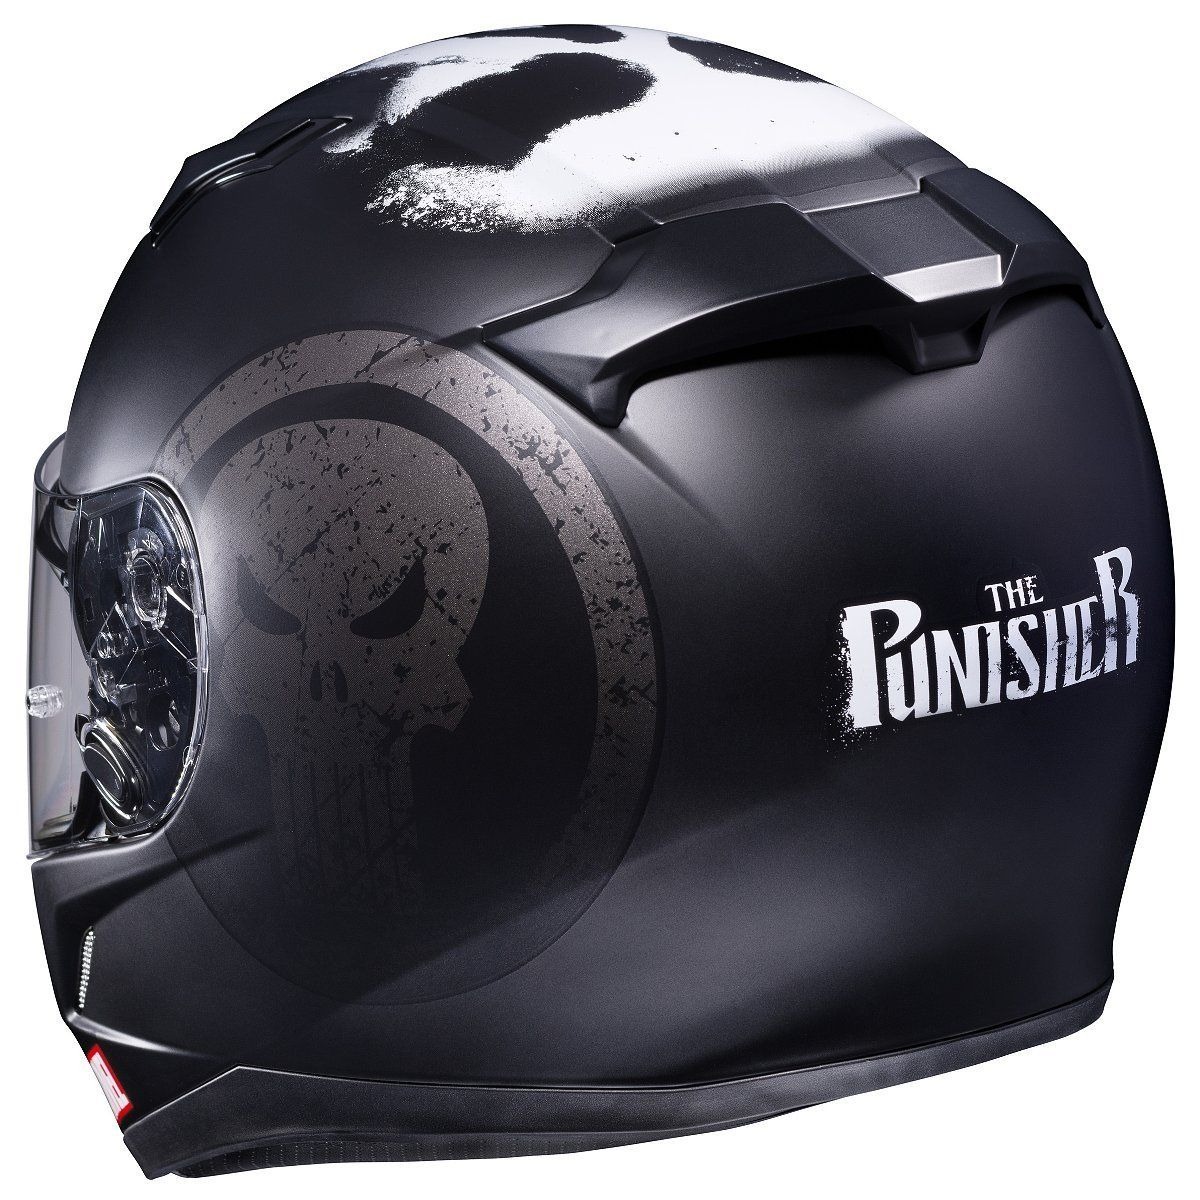 Punisher HJC CL-17 motorcycle helmet with custom paint